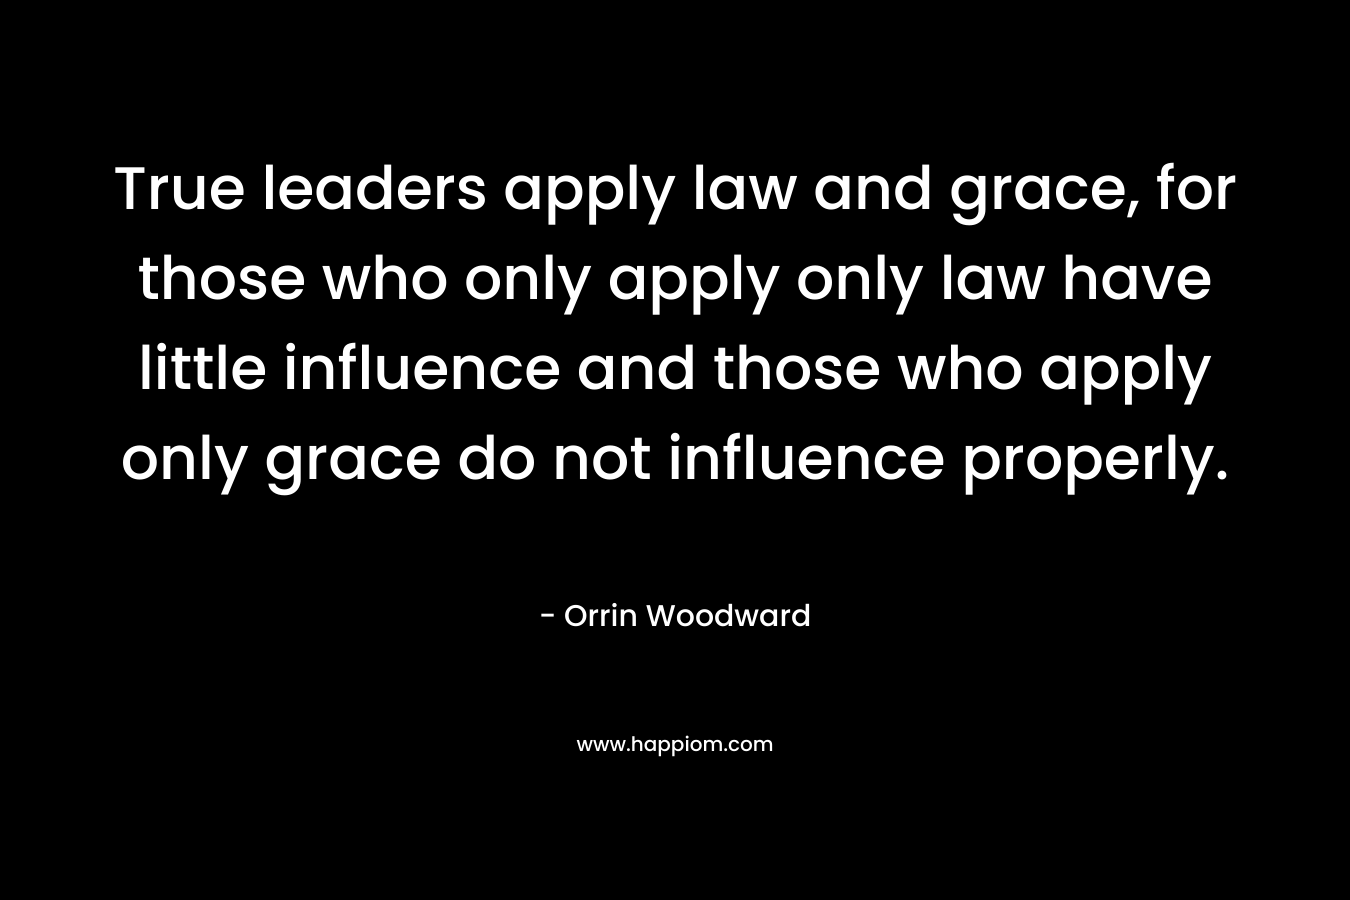 True leaders apply law and grace, for those who only apply only law have little influence and those who apply only grace do not influence properly.